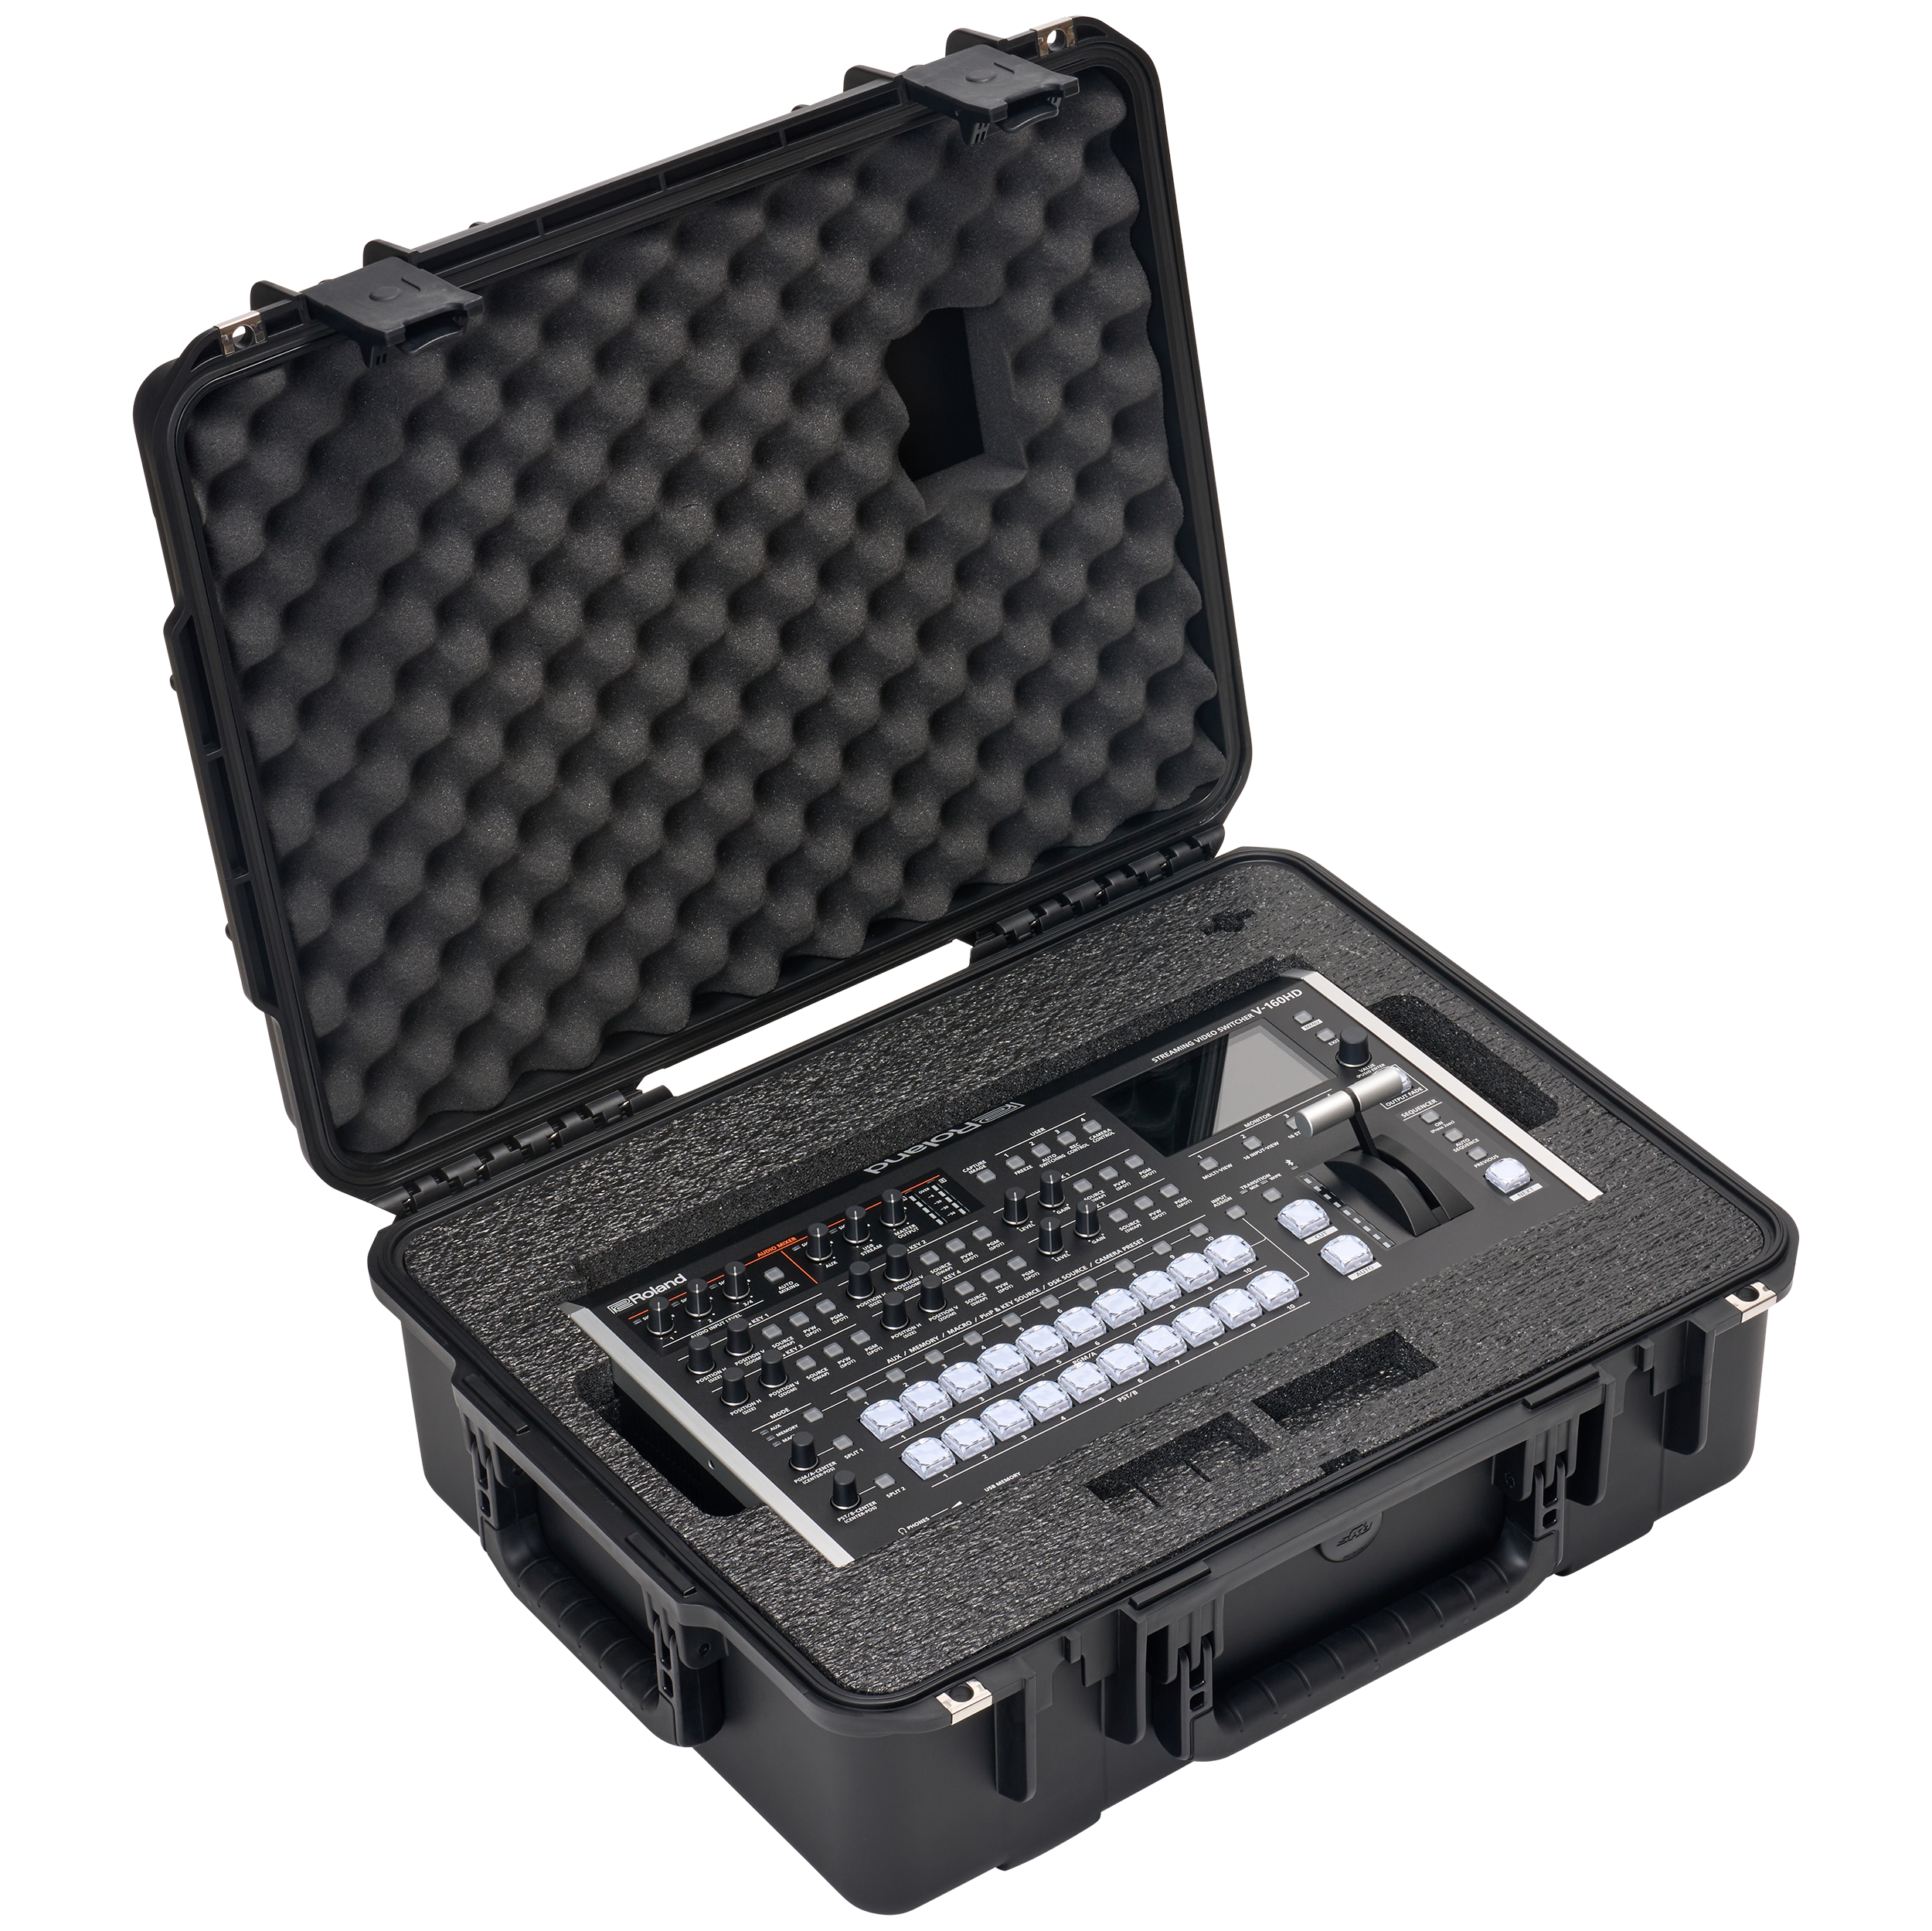 BYFP ipCase for Roland V-160HD